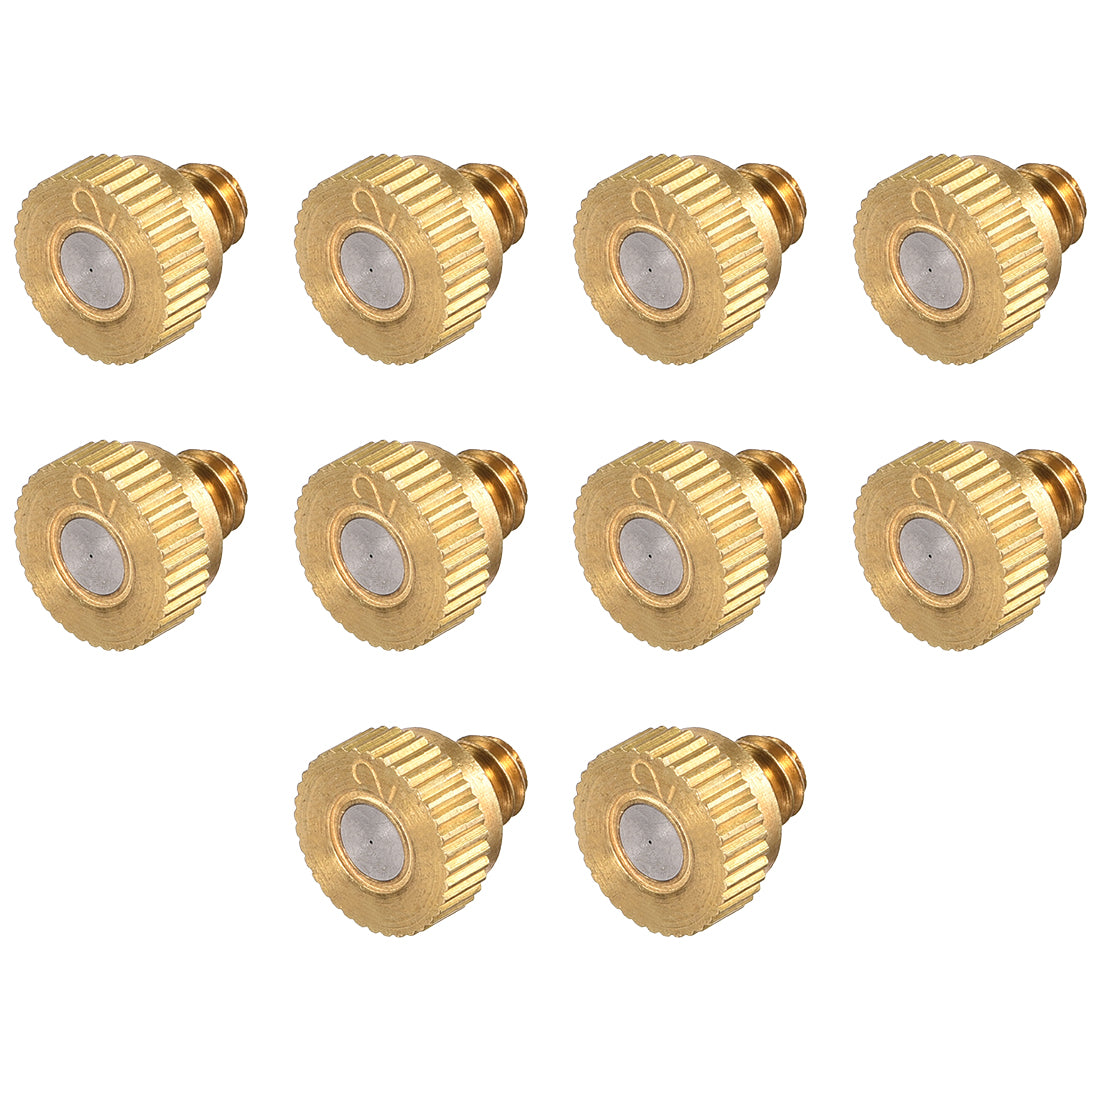 uxcell Uxcell Brass Misting Nozzle - 10/24 UNC 0.2mm Orifice Dia Replacement Heads for Outdoor Cooling System - 10 Pcs